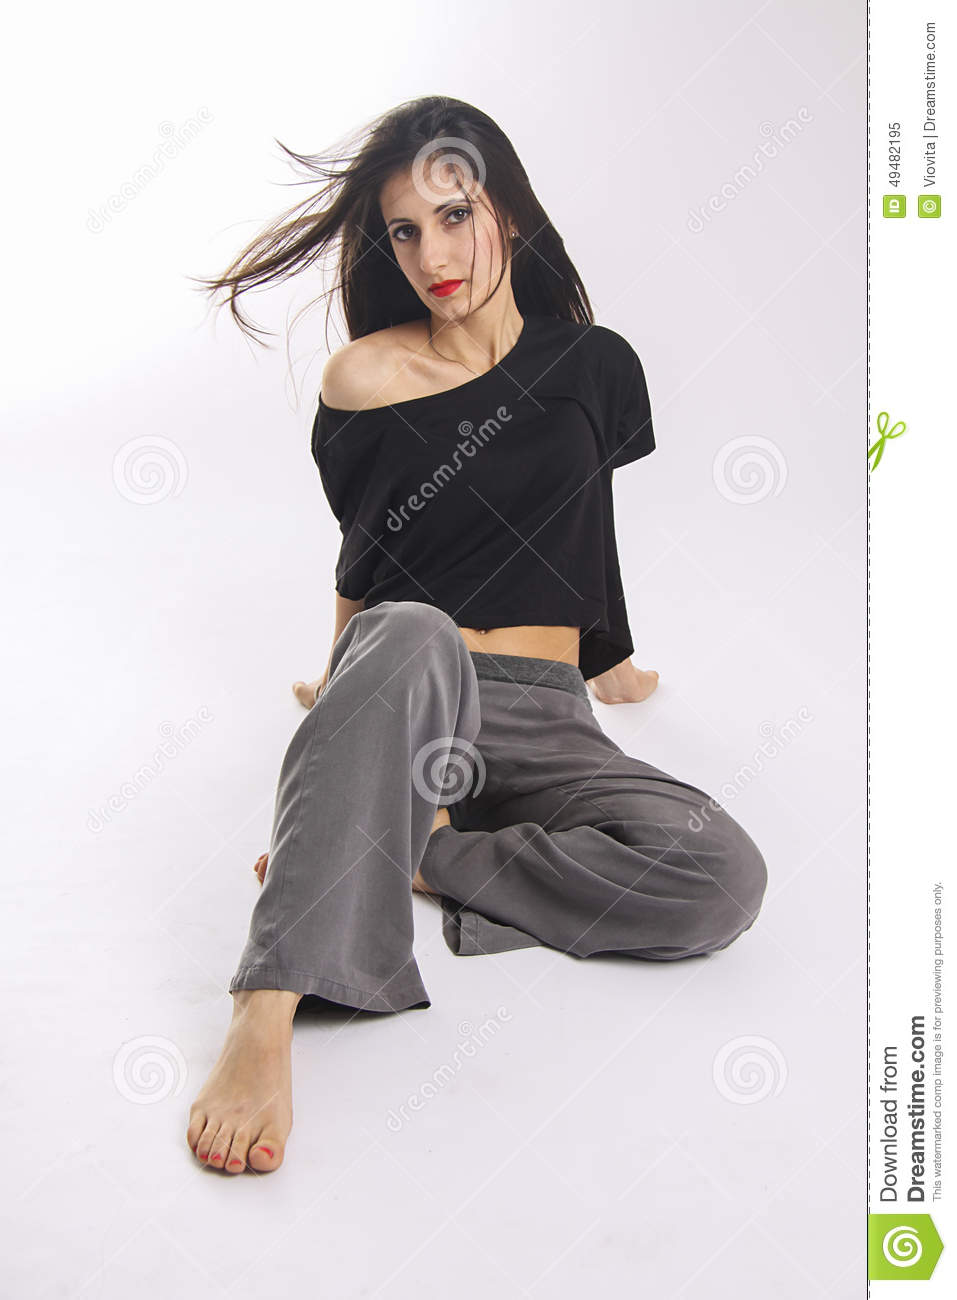 Barefoot Woman In Simple Clothes Stock Photo   Image  49482195